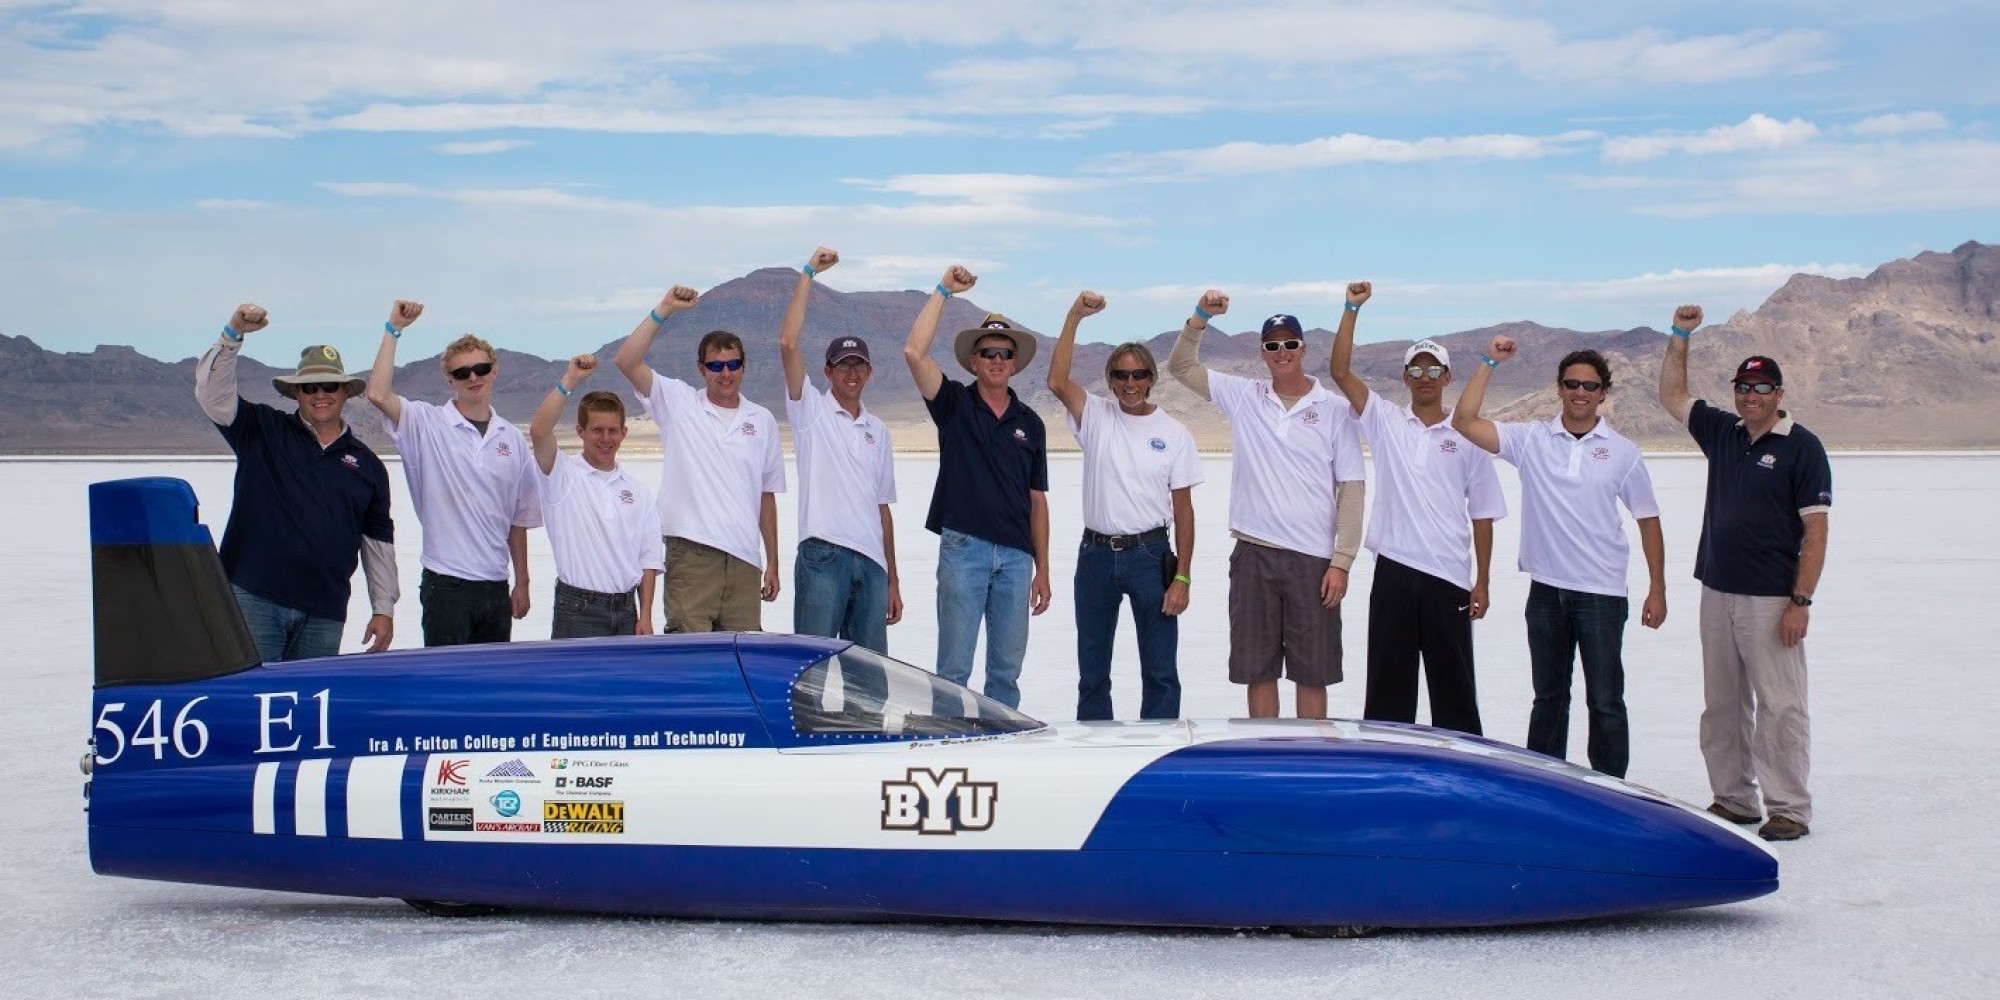 Electric Car Breaks 200 MPH, Sets New World Land Speed Record HuffPost